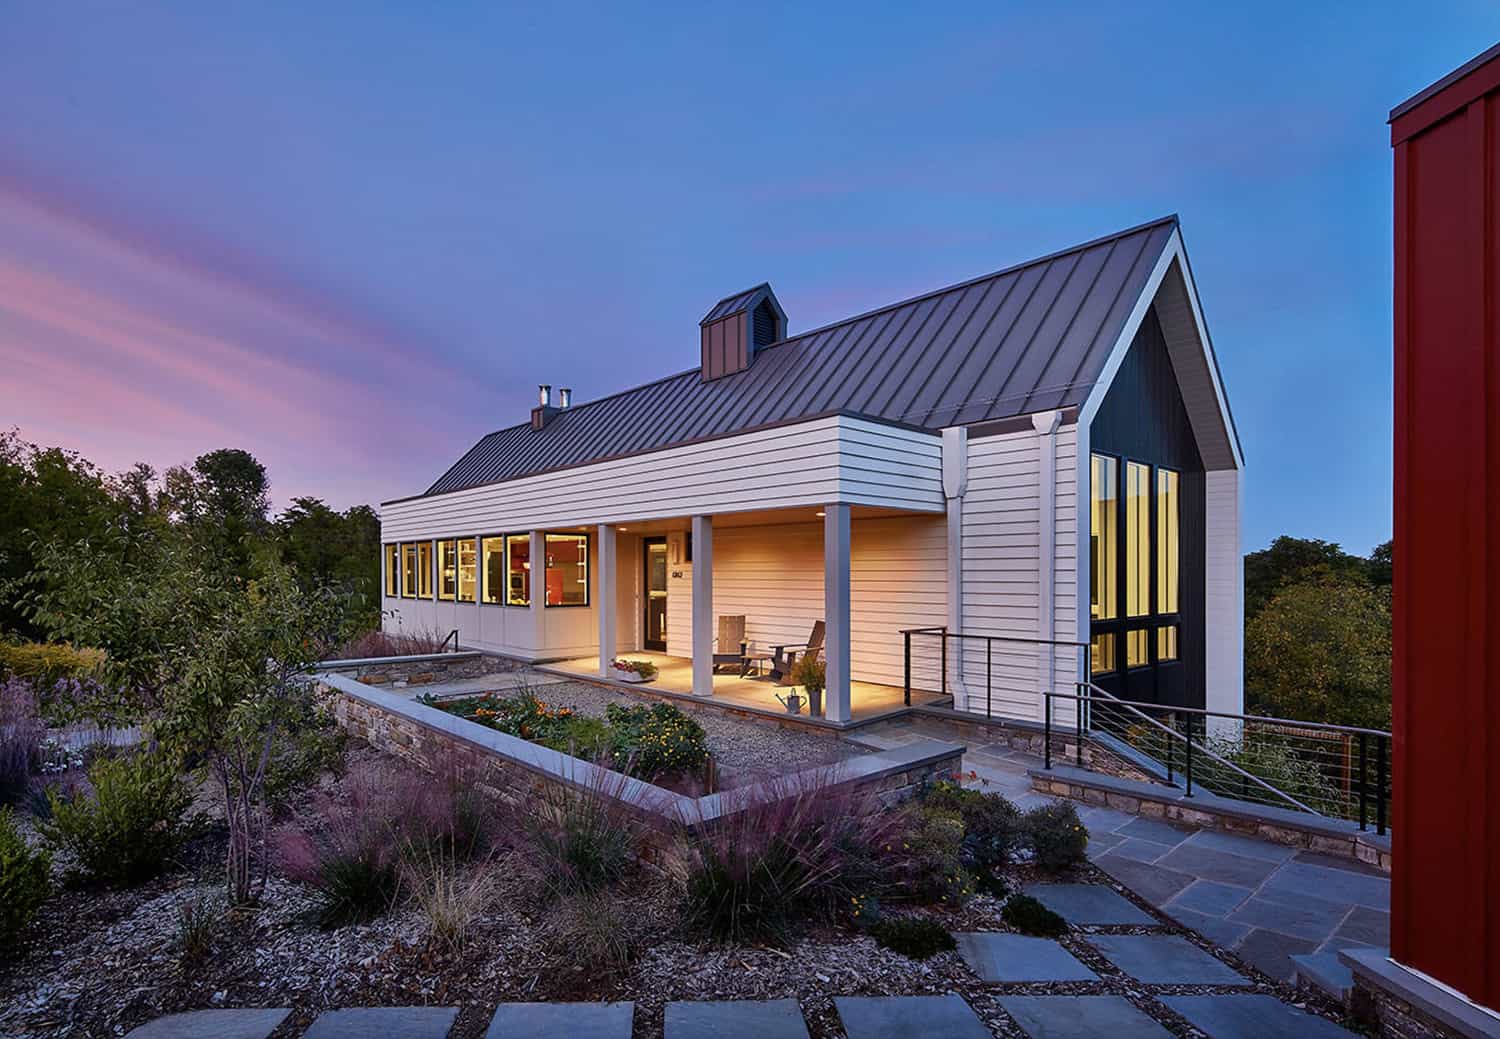 A white clapboard farmhouse with a stunning modern twist in Virginia